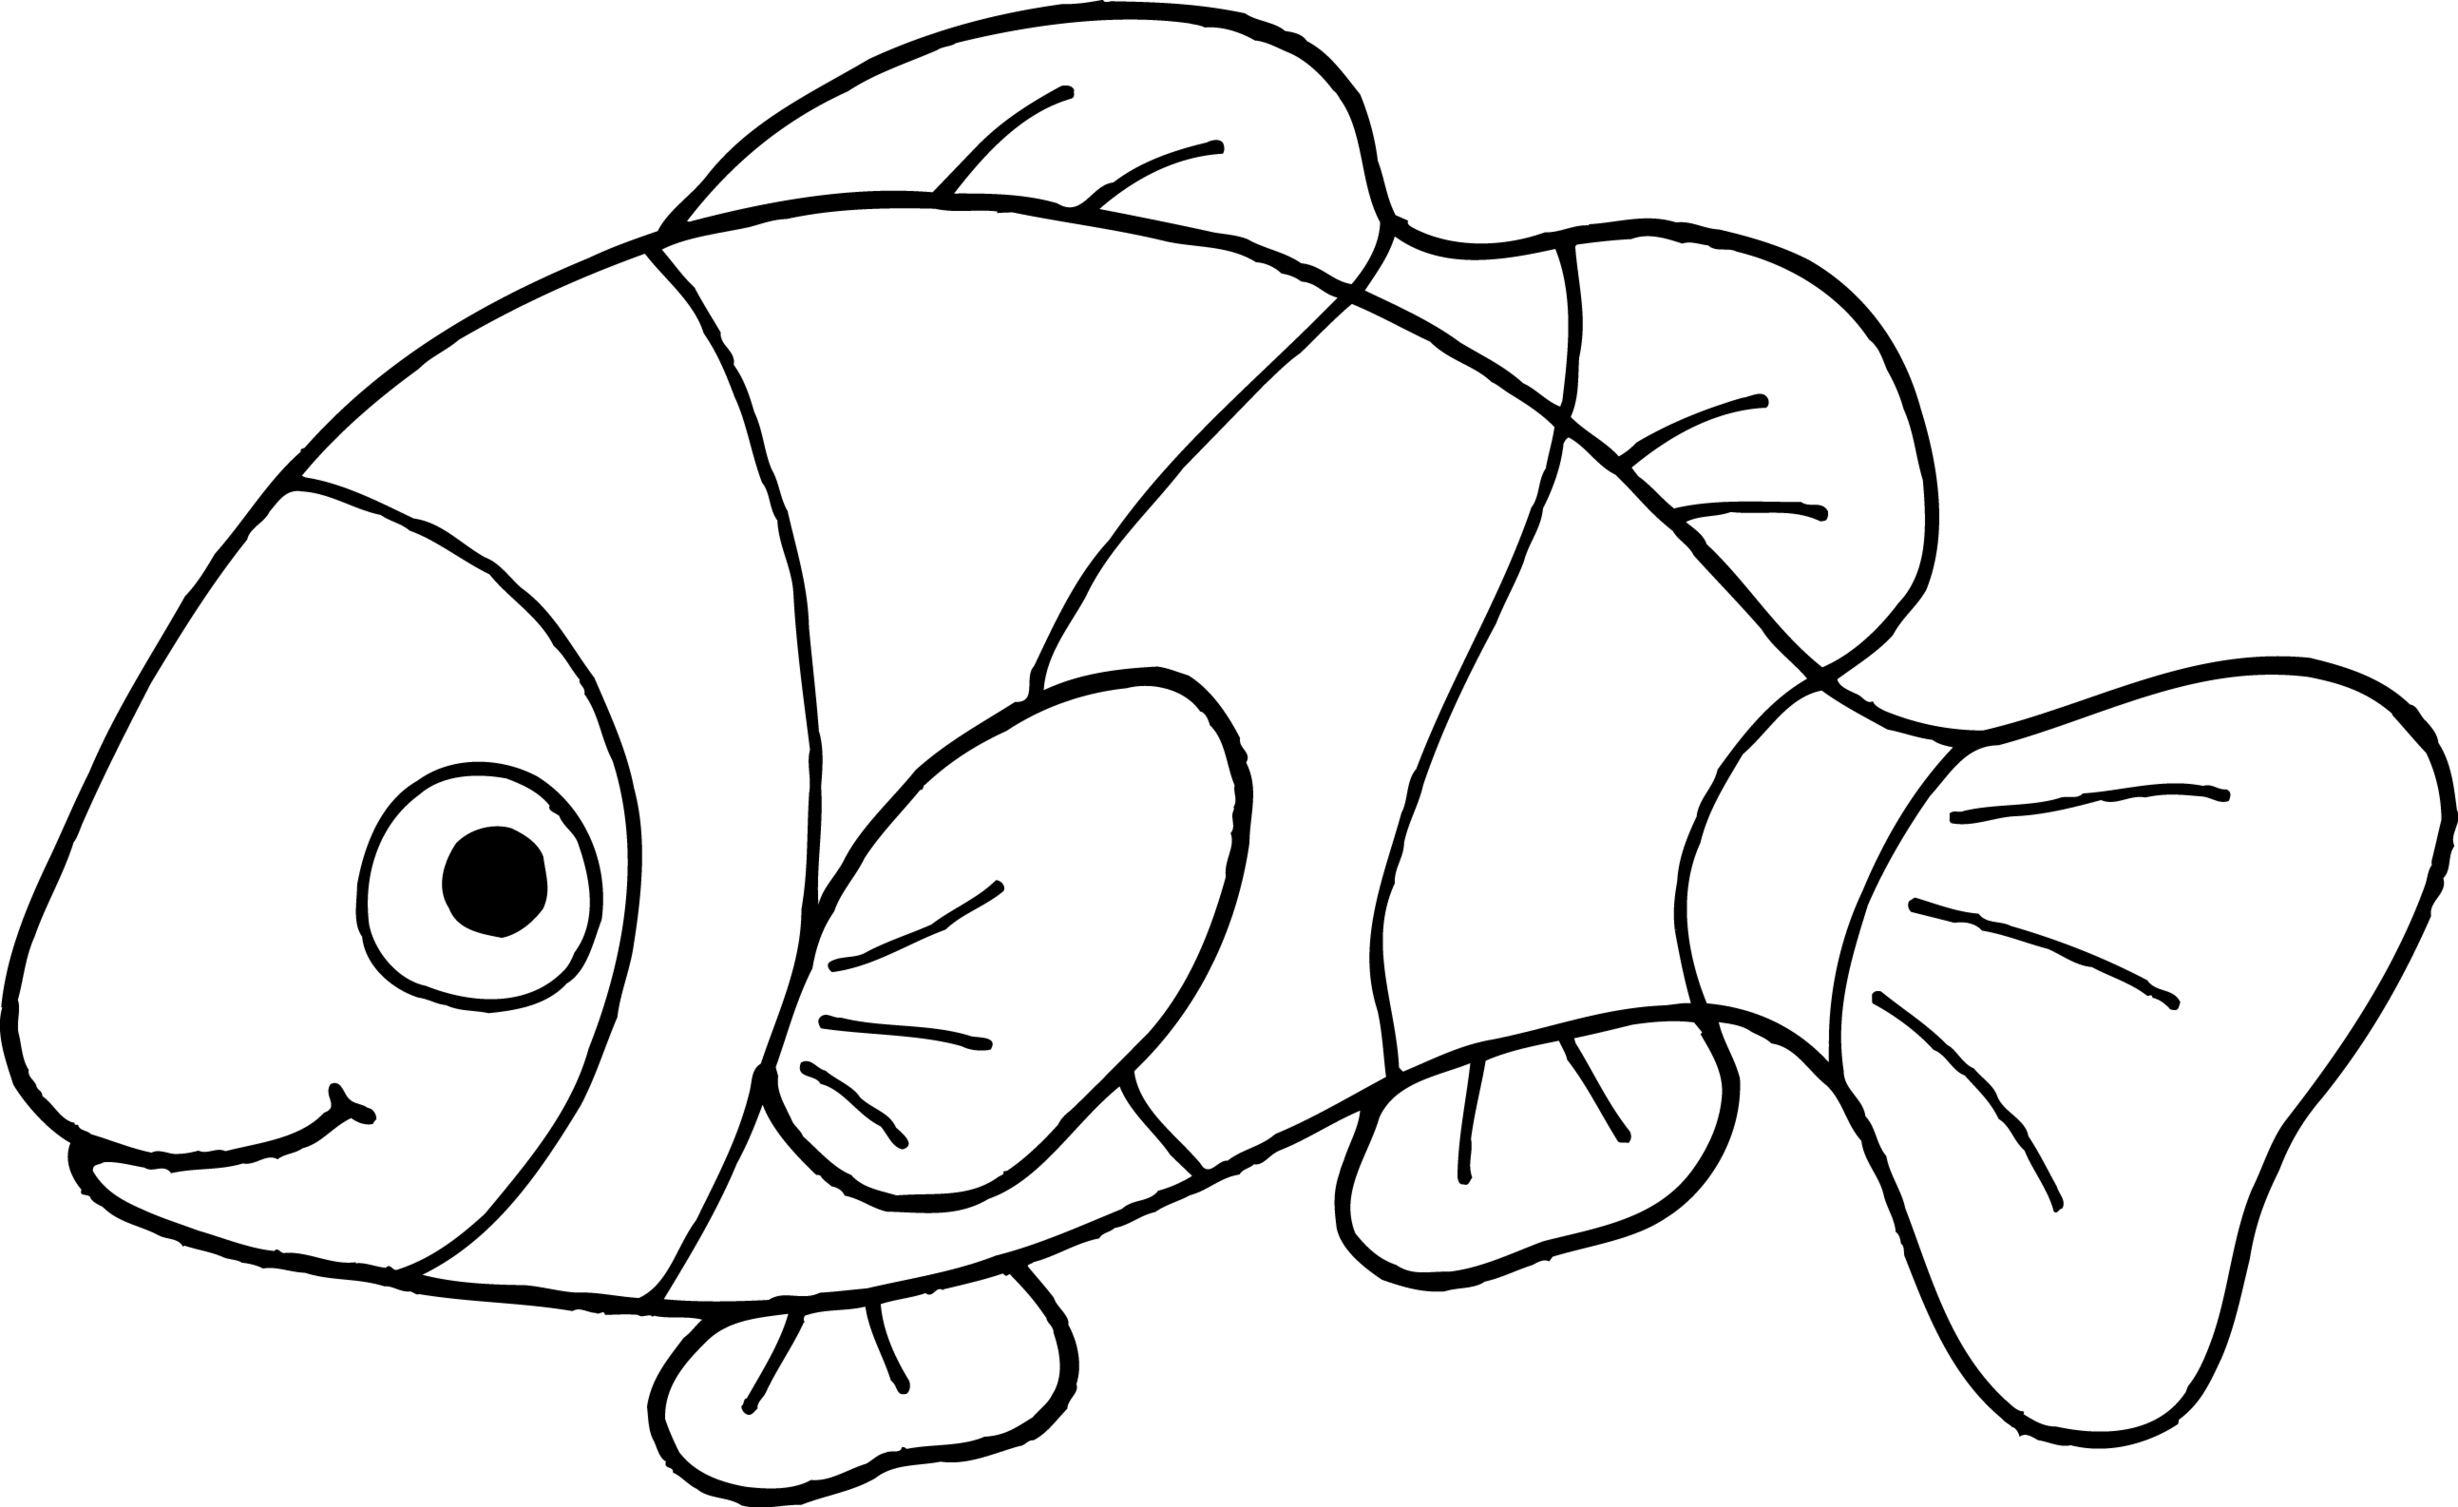 rainbow-fish-outline-free-download-on-clipartmag